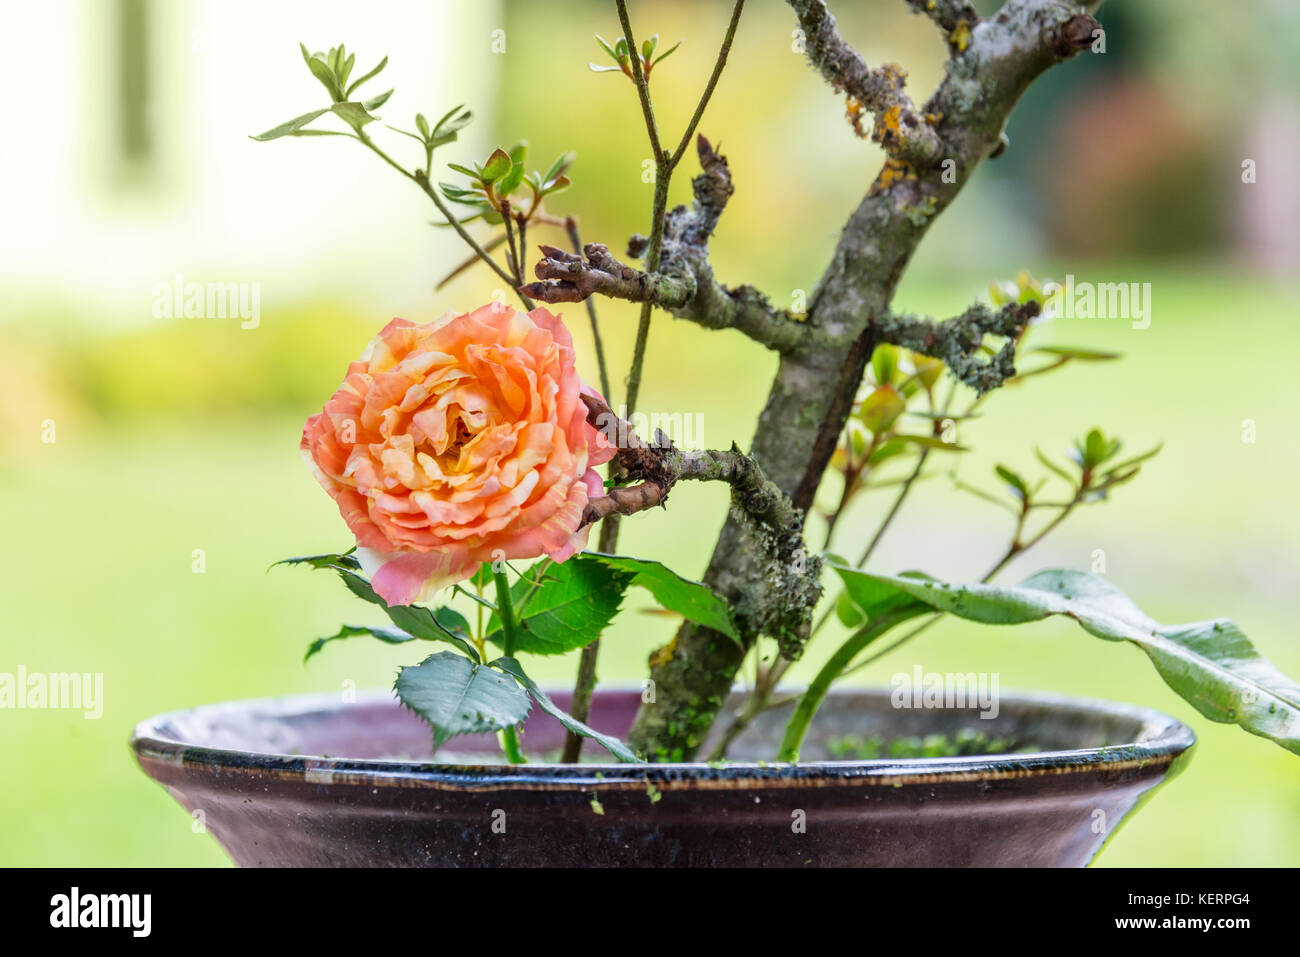 Close up of a chinese flower arrangement with an orange rose Stock Photo